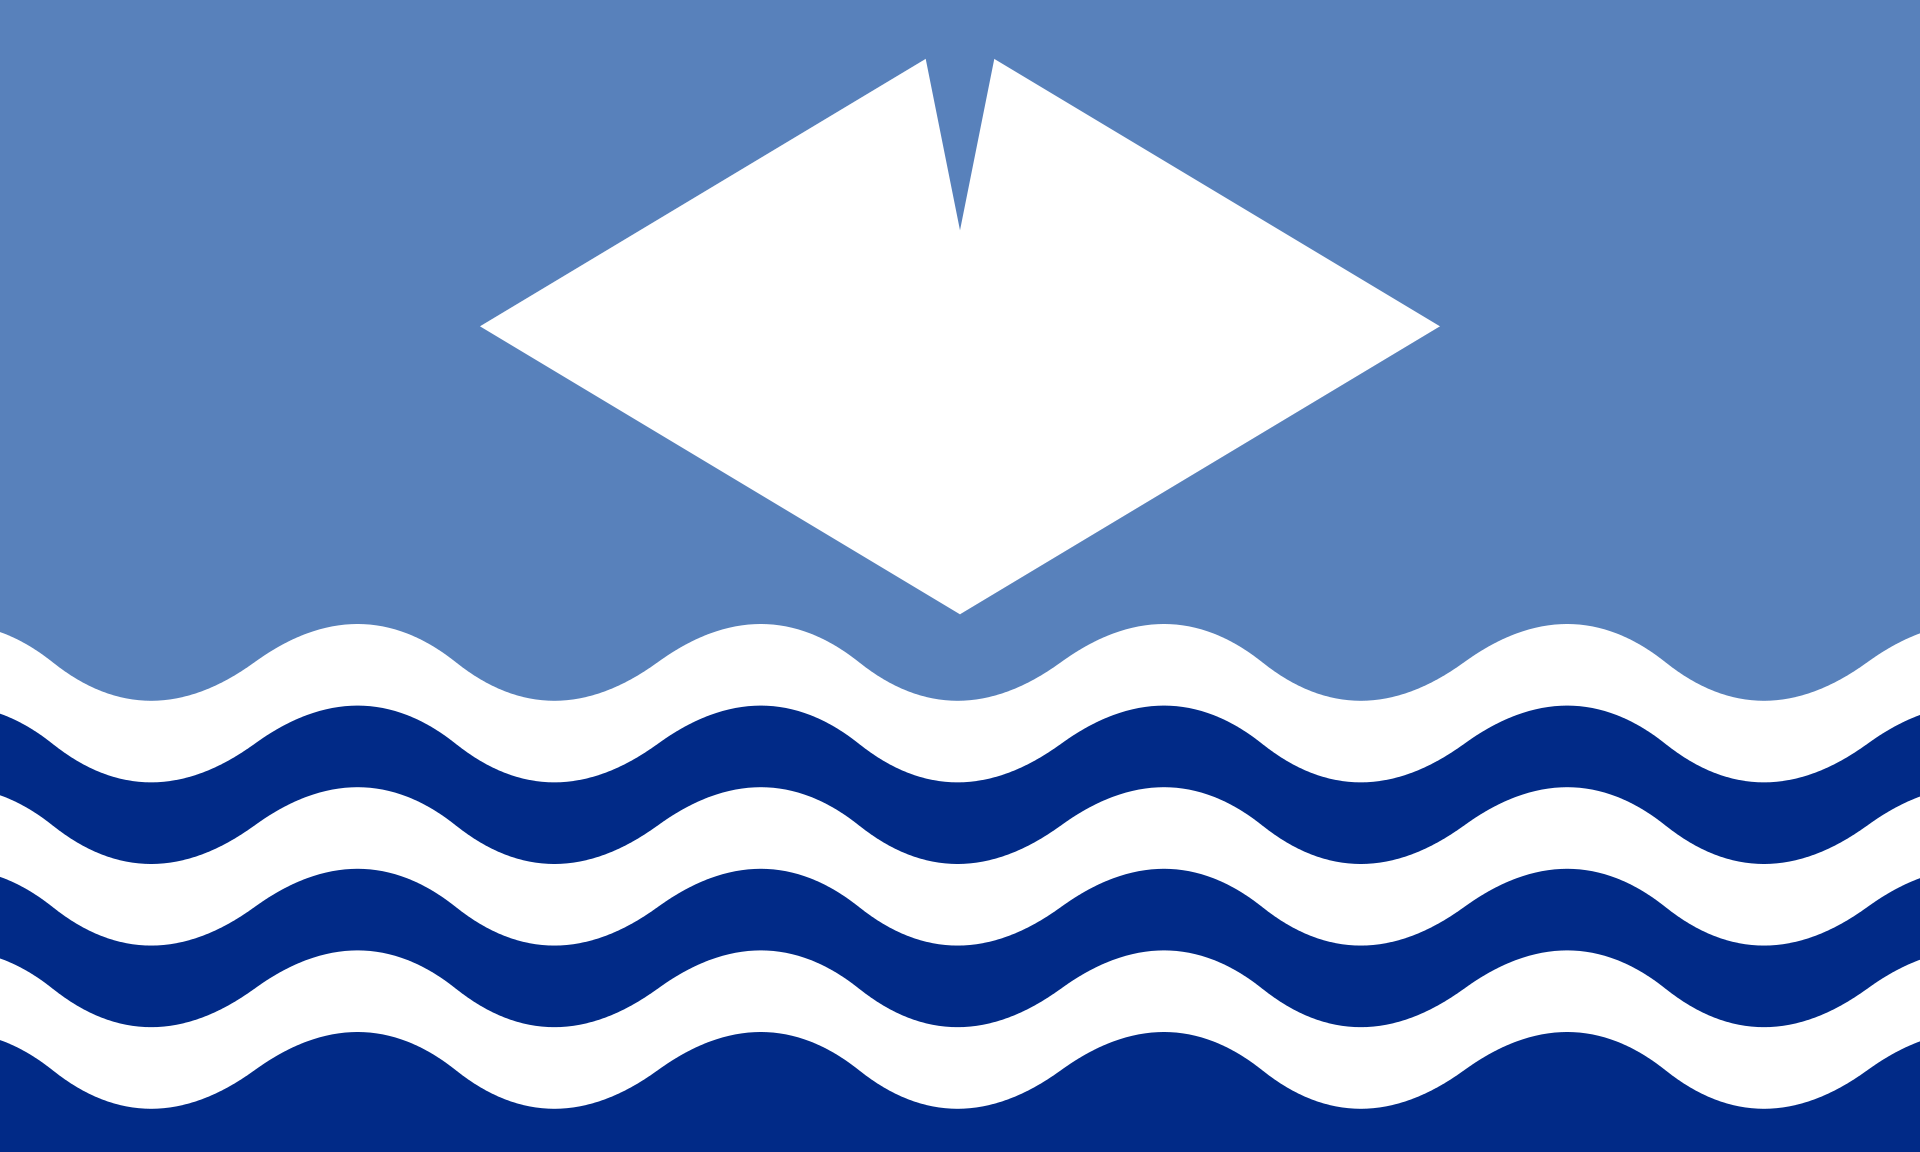 The flag of the Isle of White. The lower half is dark blue and white alternating wavy lines to indicate the sea The upper half is light blue with a white geometric shape to represent the island, which is a diamond with a triangular portion cut from the uppermost corner.